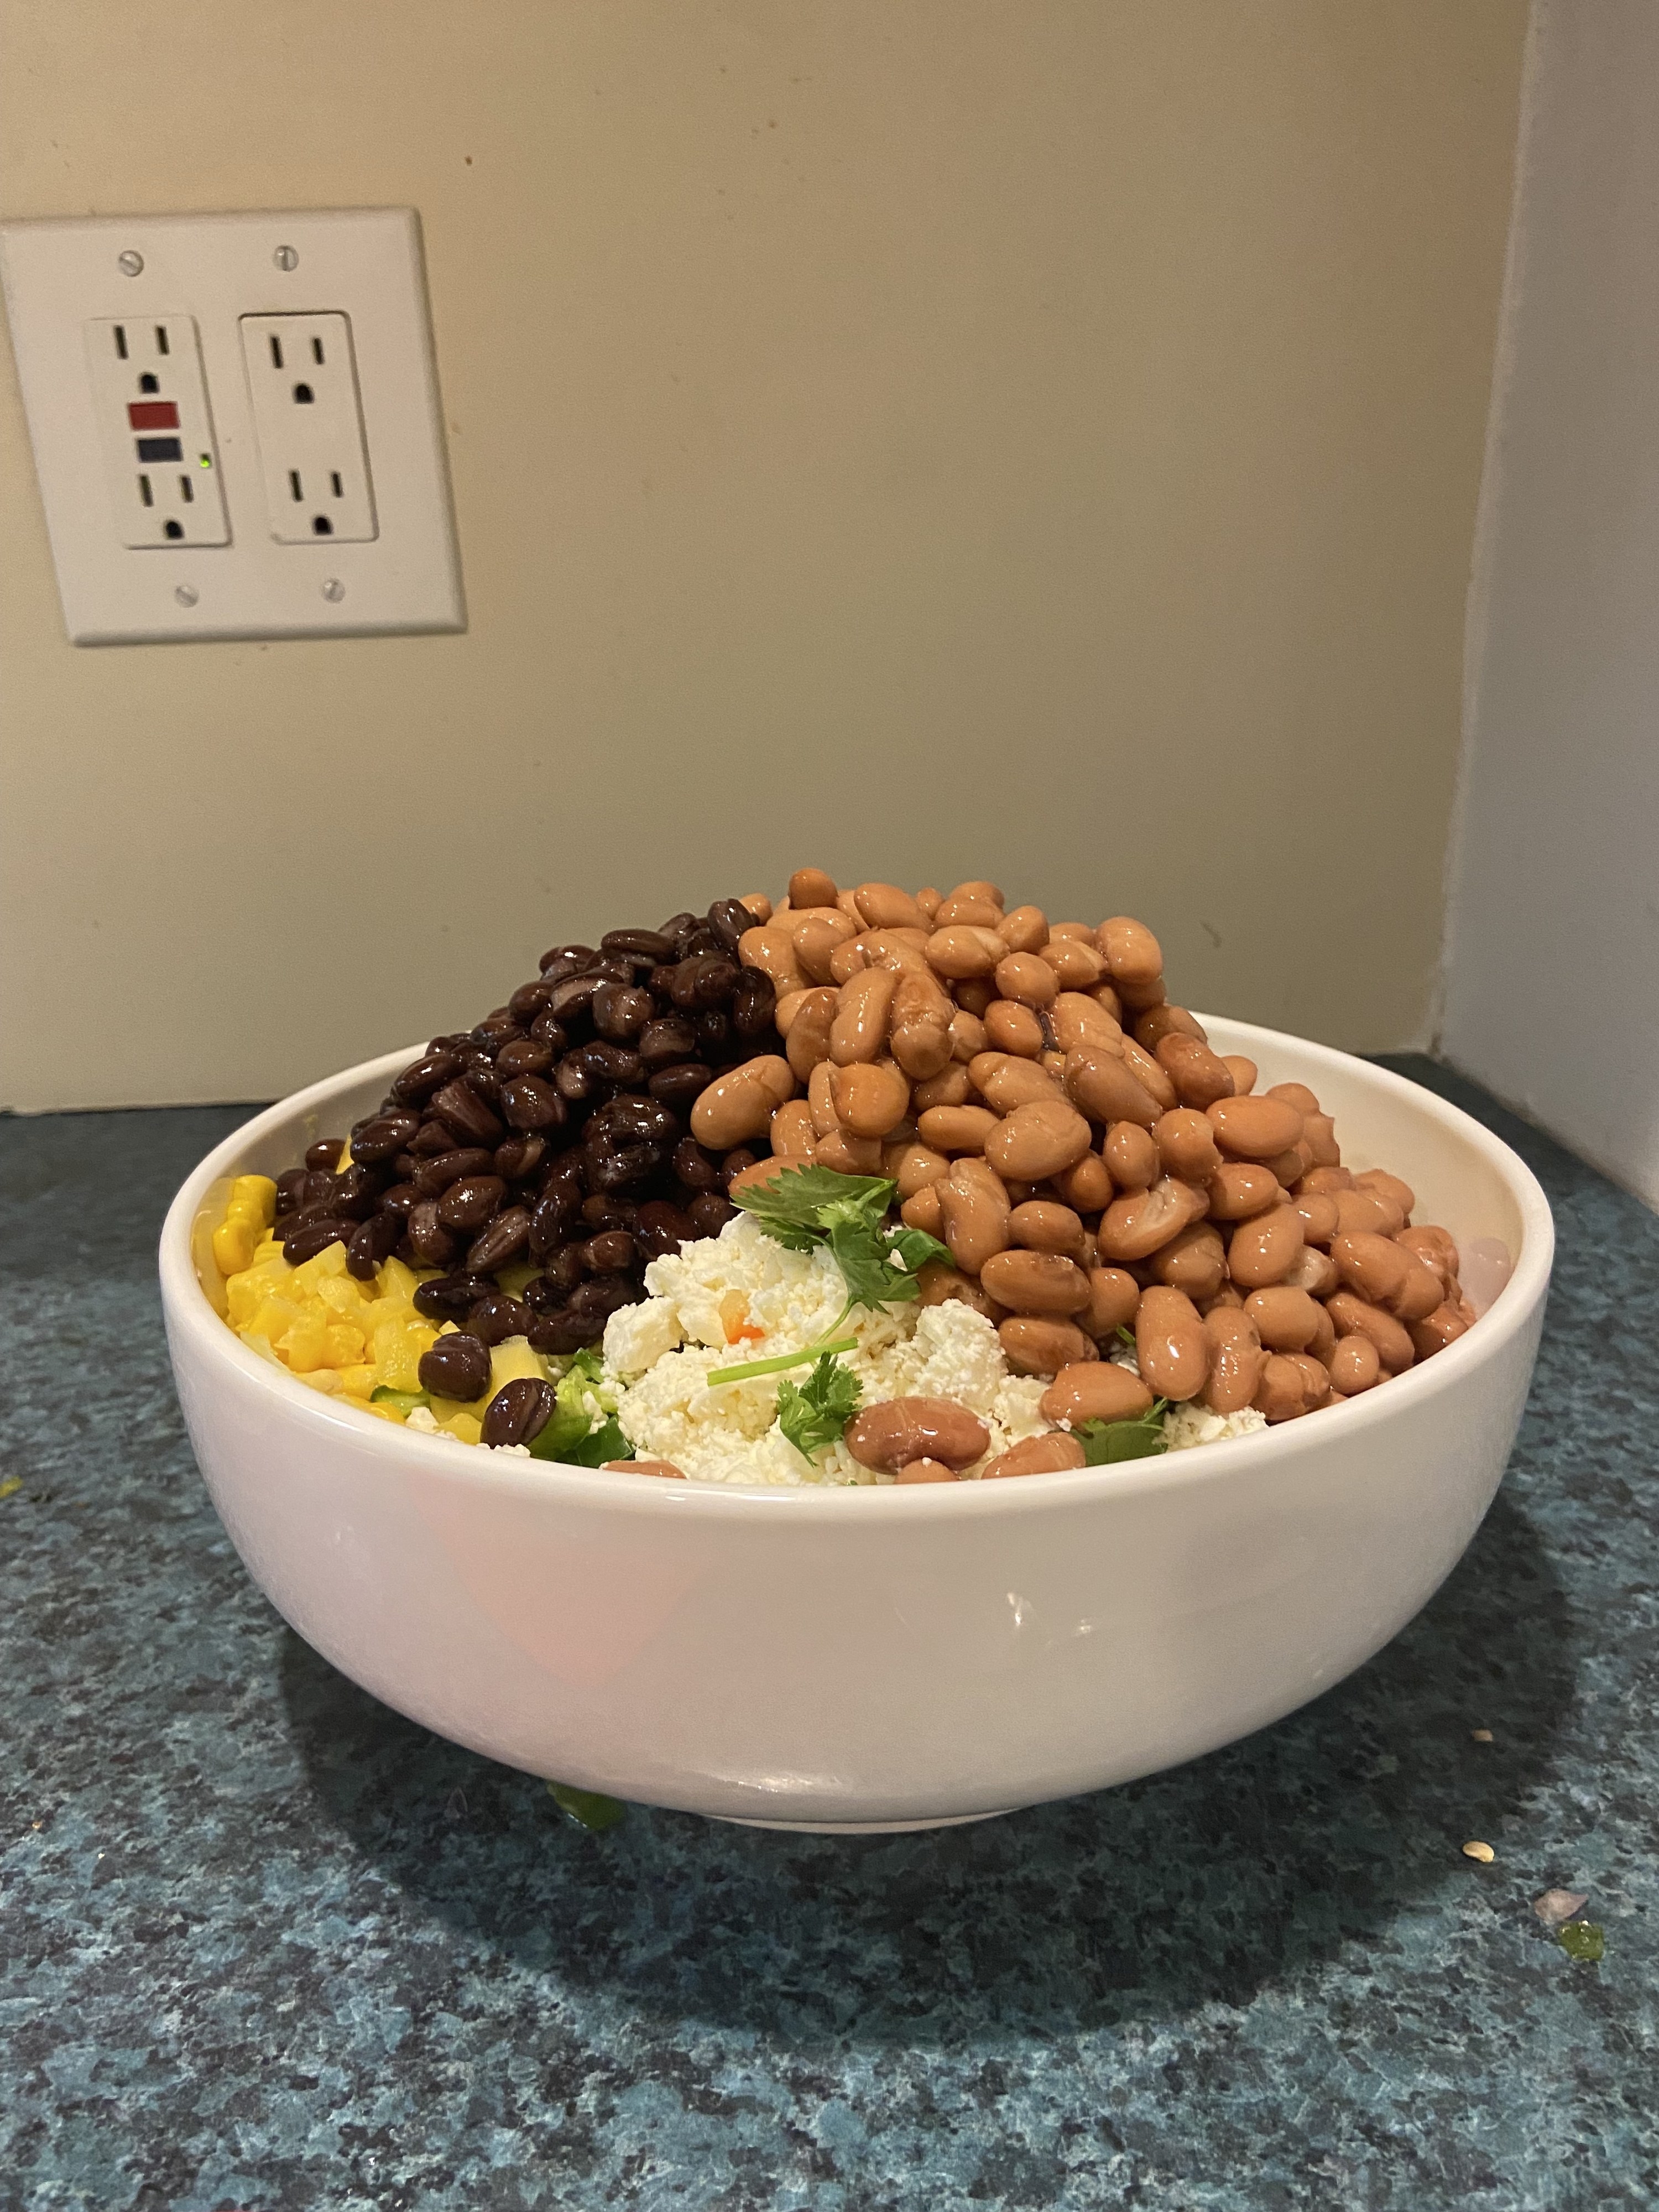 A bowl with beans, veggies, and cheese